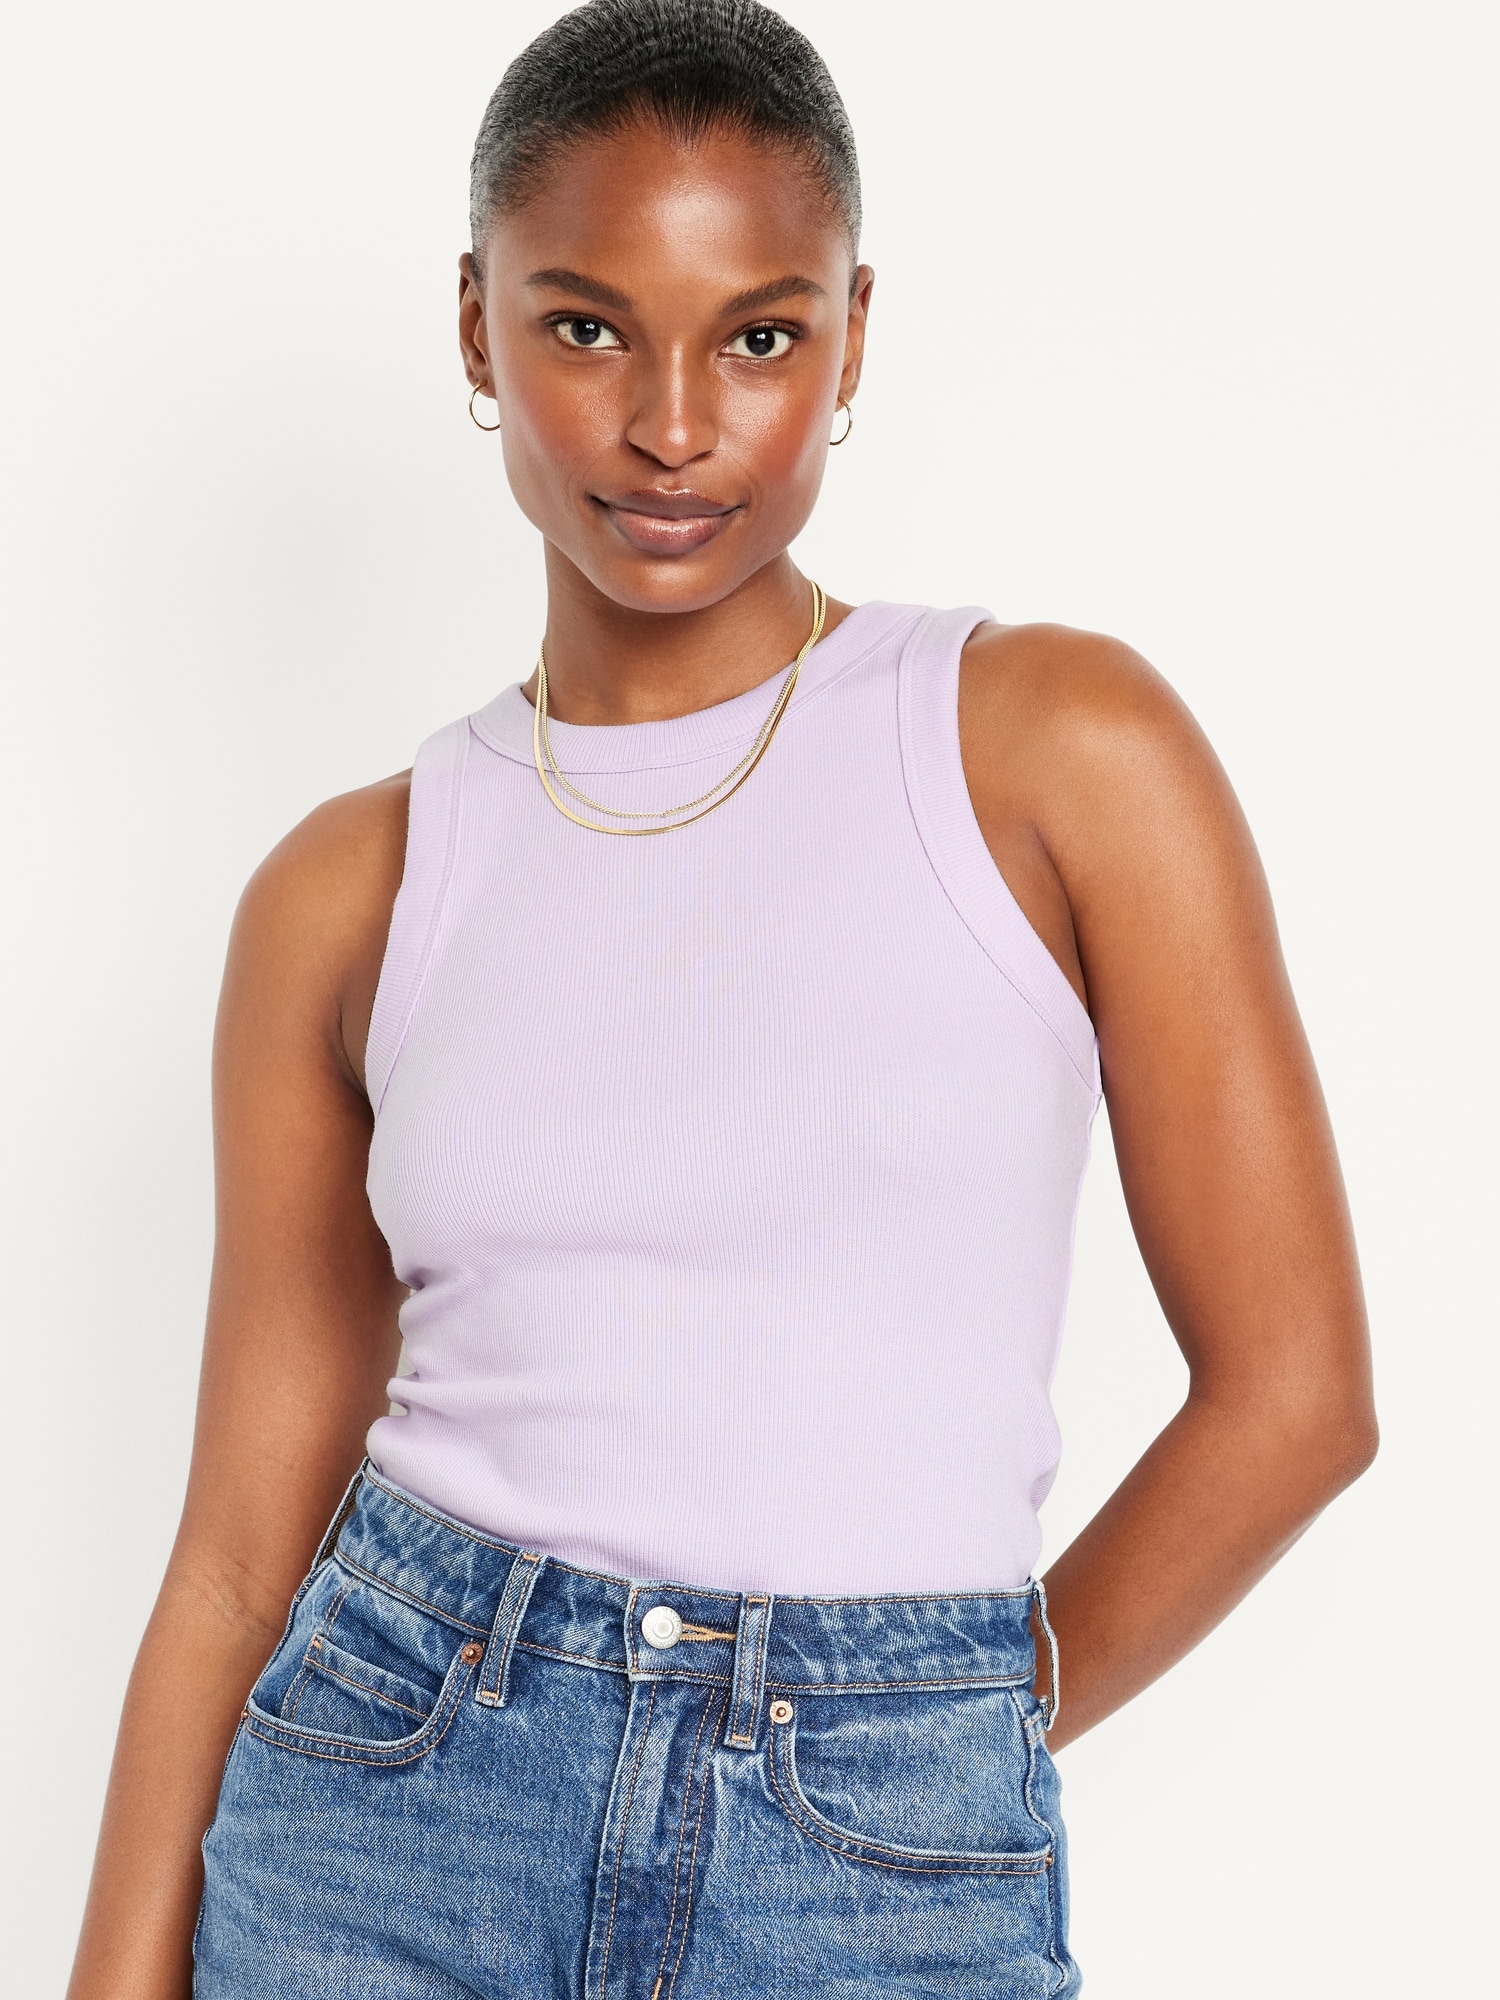 Snug Cropped Tank Top for Women | Old Navy